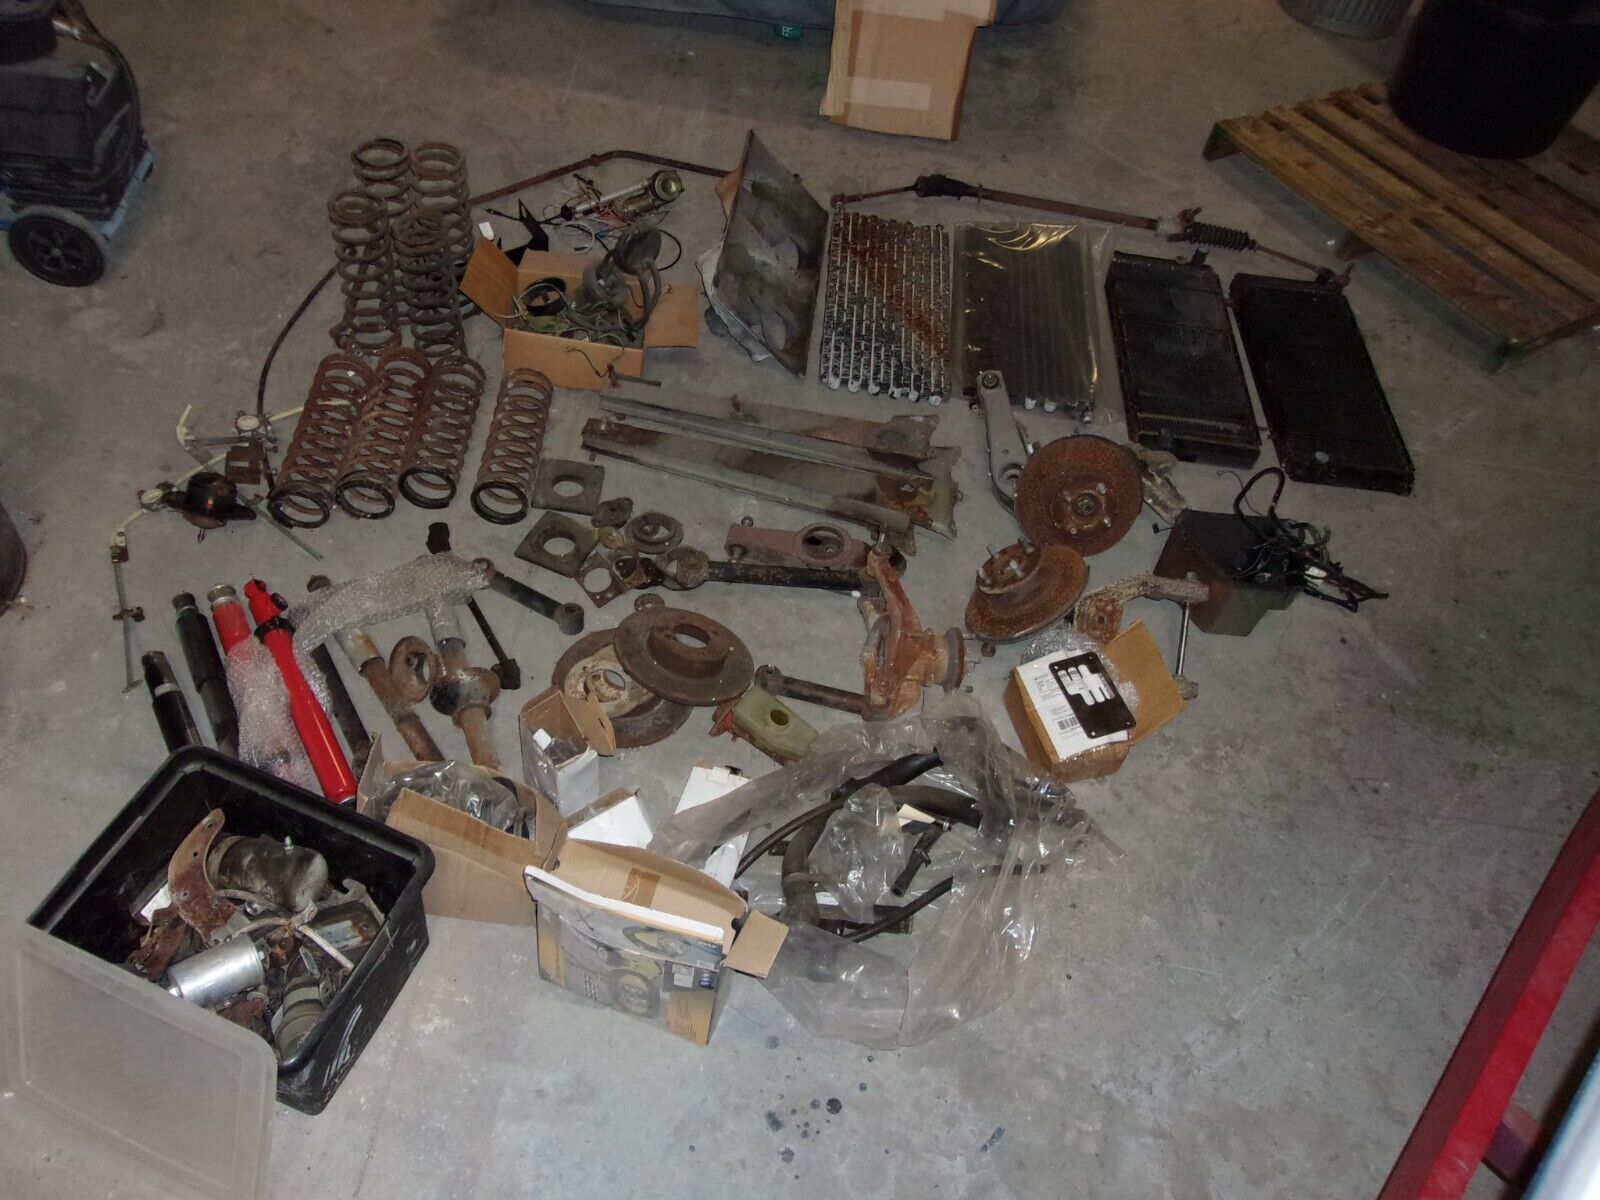 Large Lot of Used Fair to Poor Cond Delorean DMC-12 Parts, Restoration Leftovers